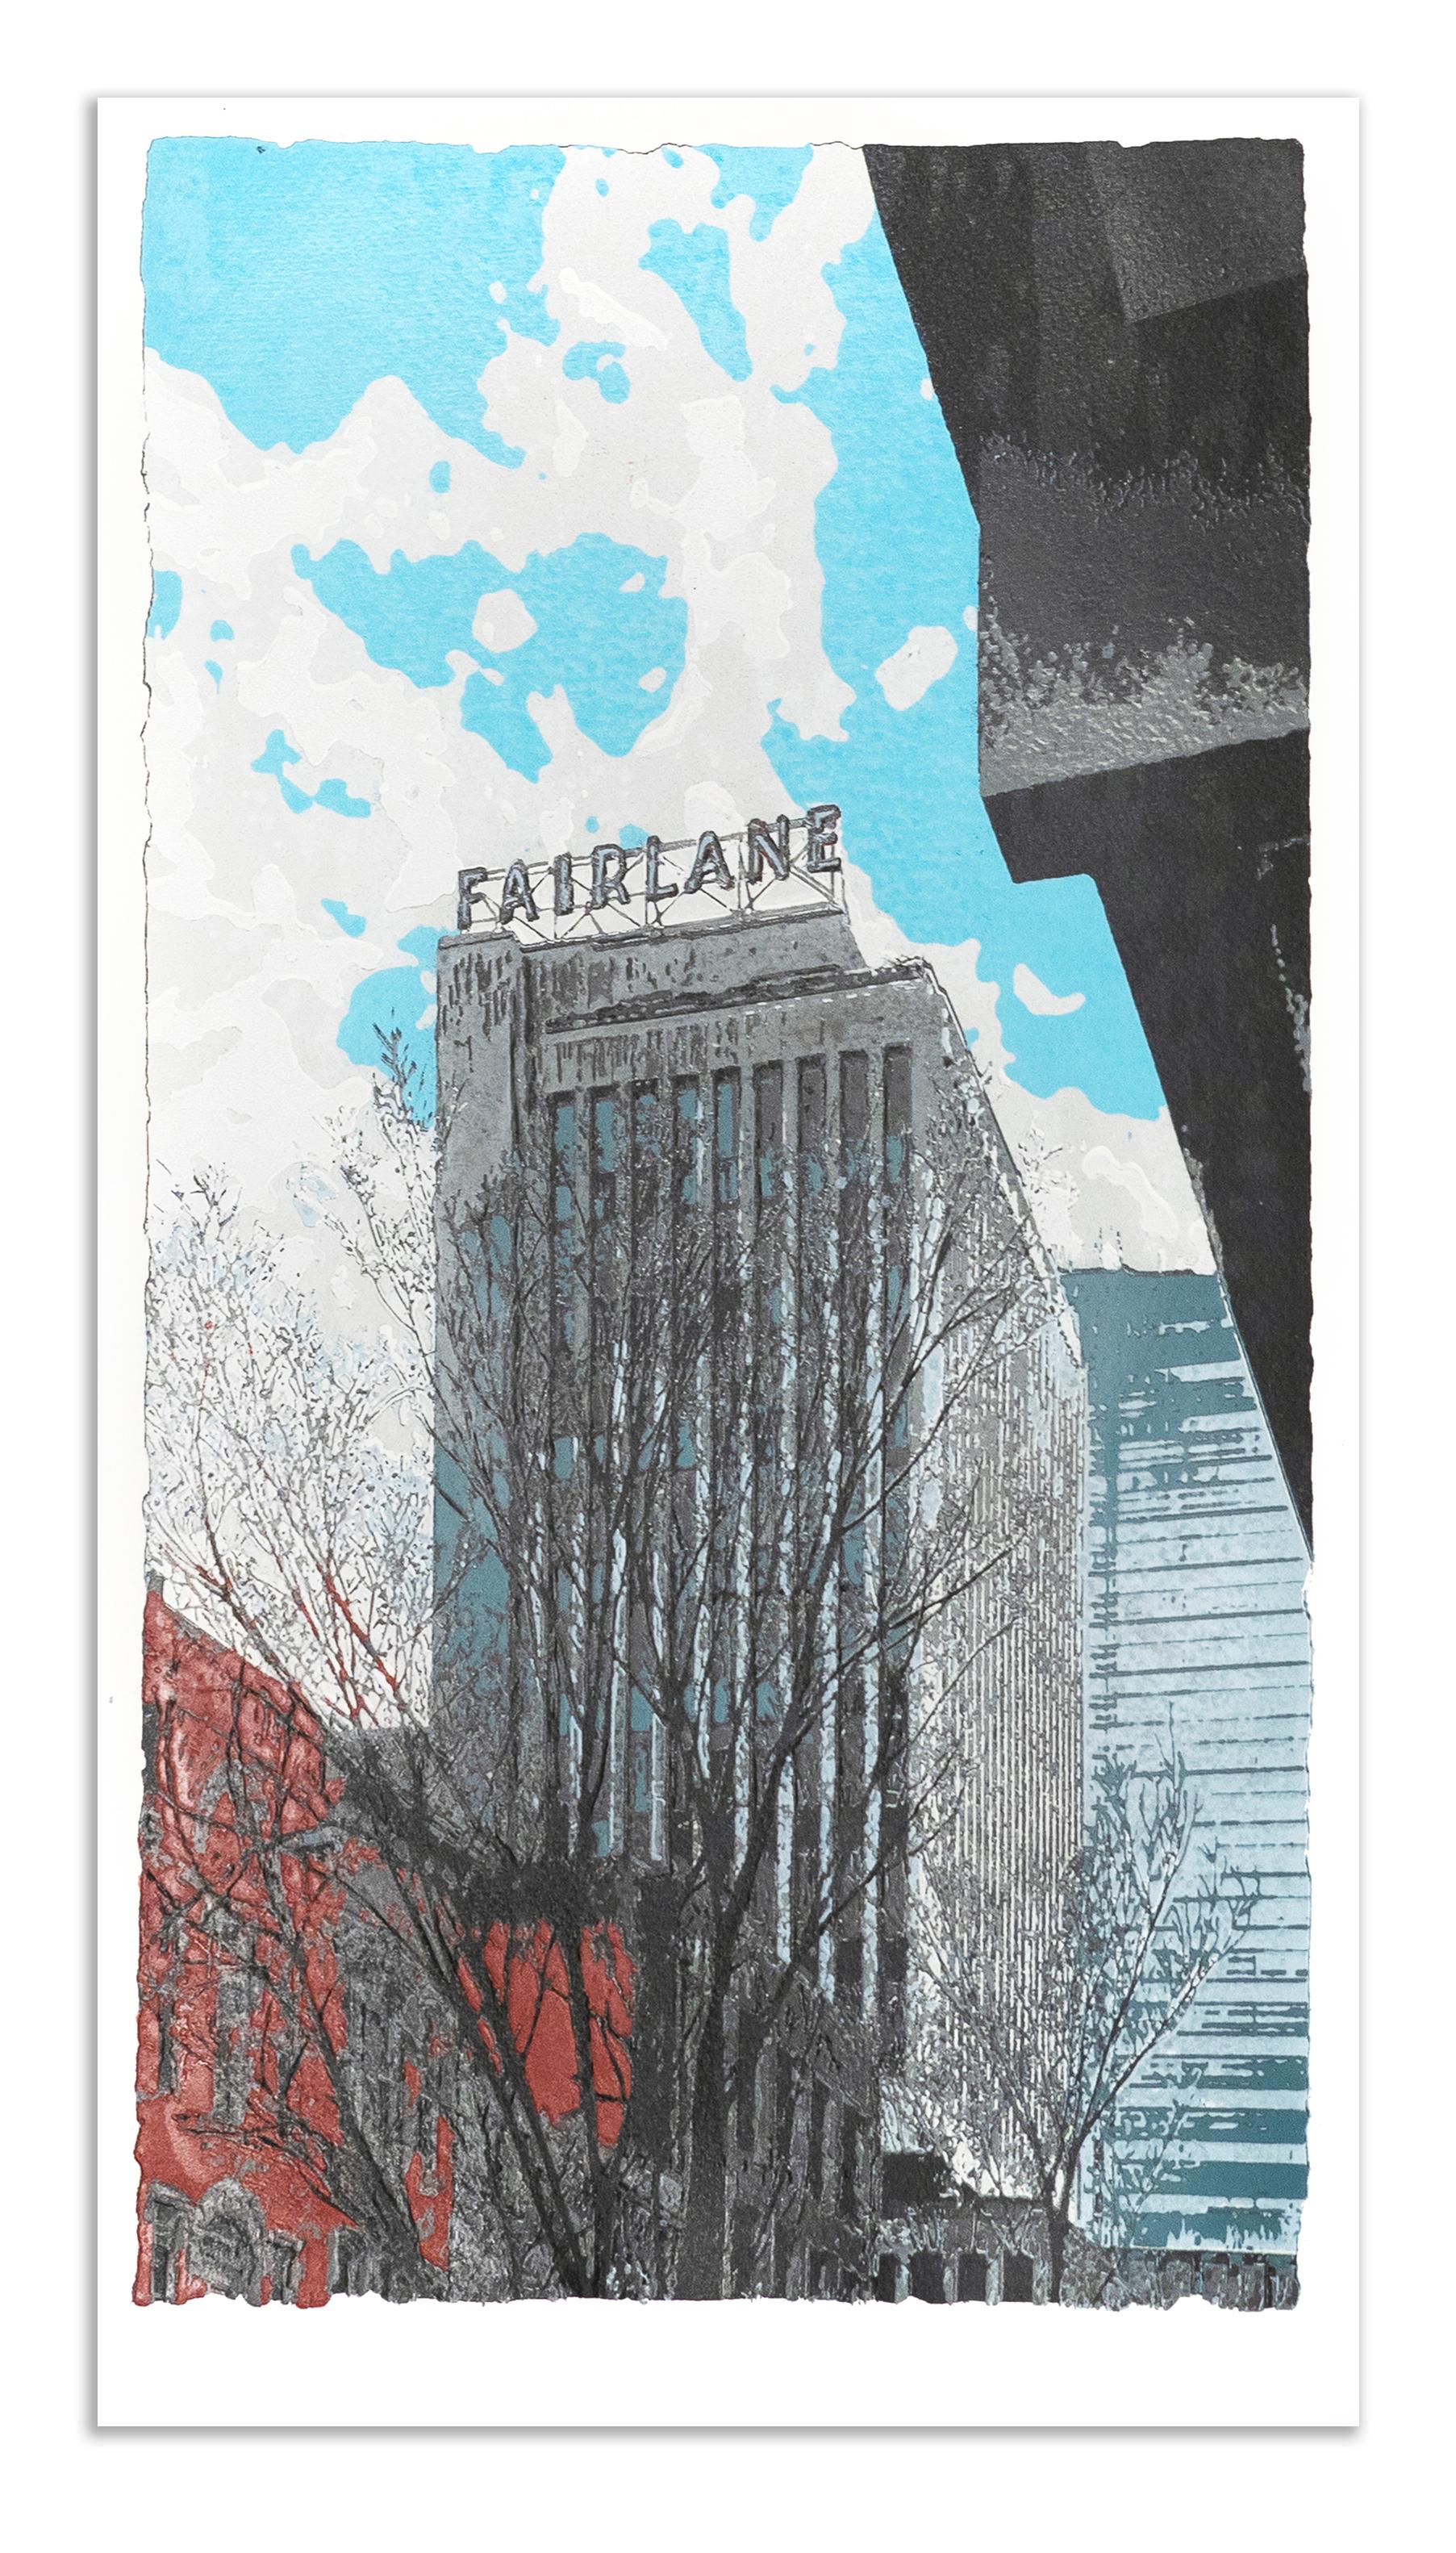 The Fairlane Hotel (3/5) - Print by Terrell Thornhill 